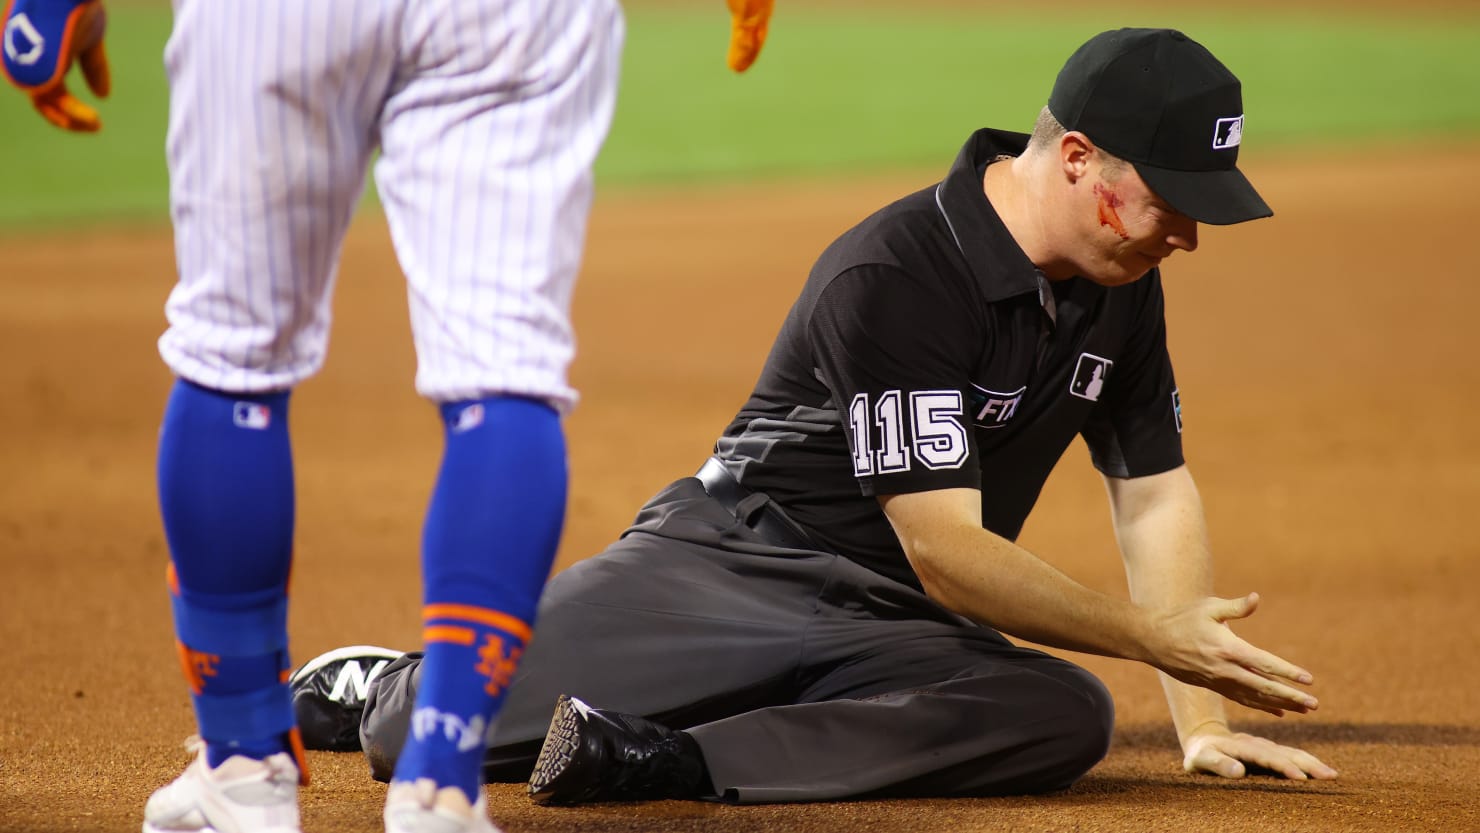 Video: MLB Umpire Floored by Brutal Stray Ball to the Head